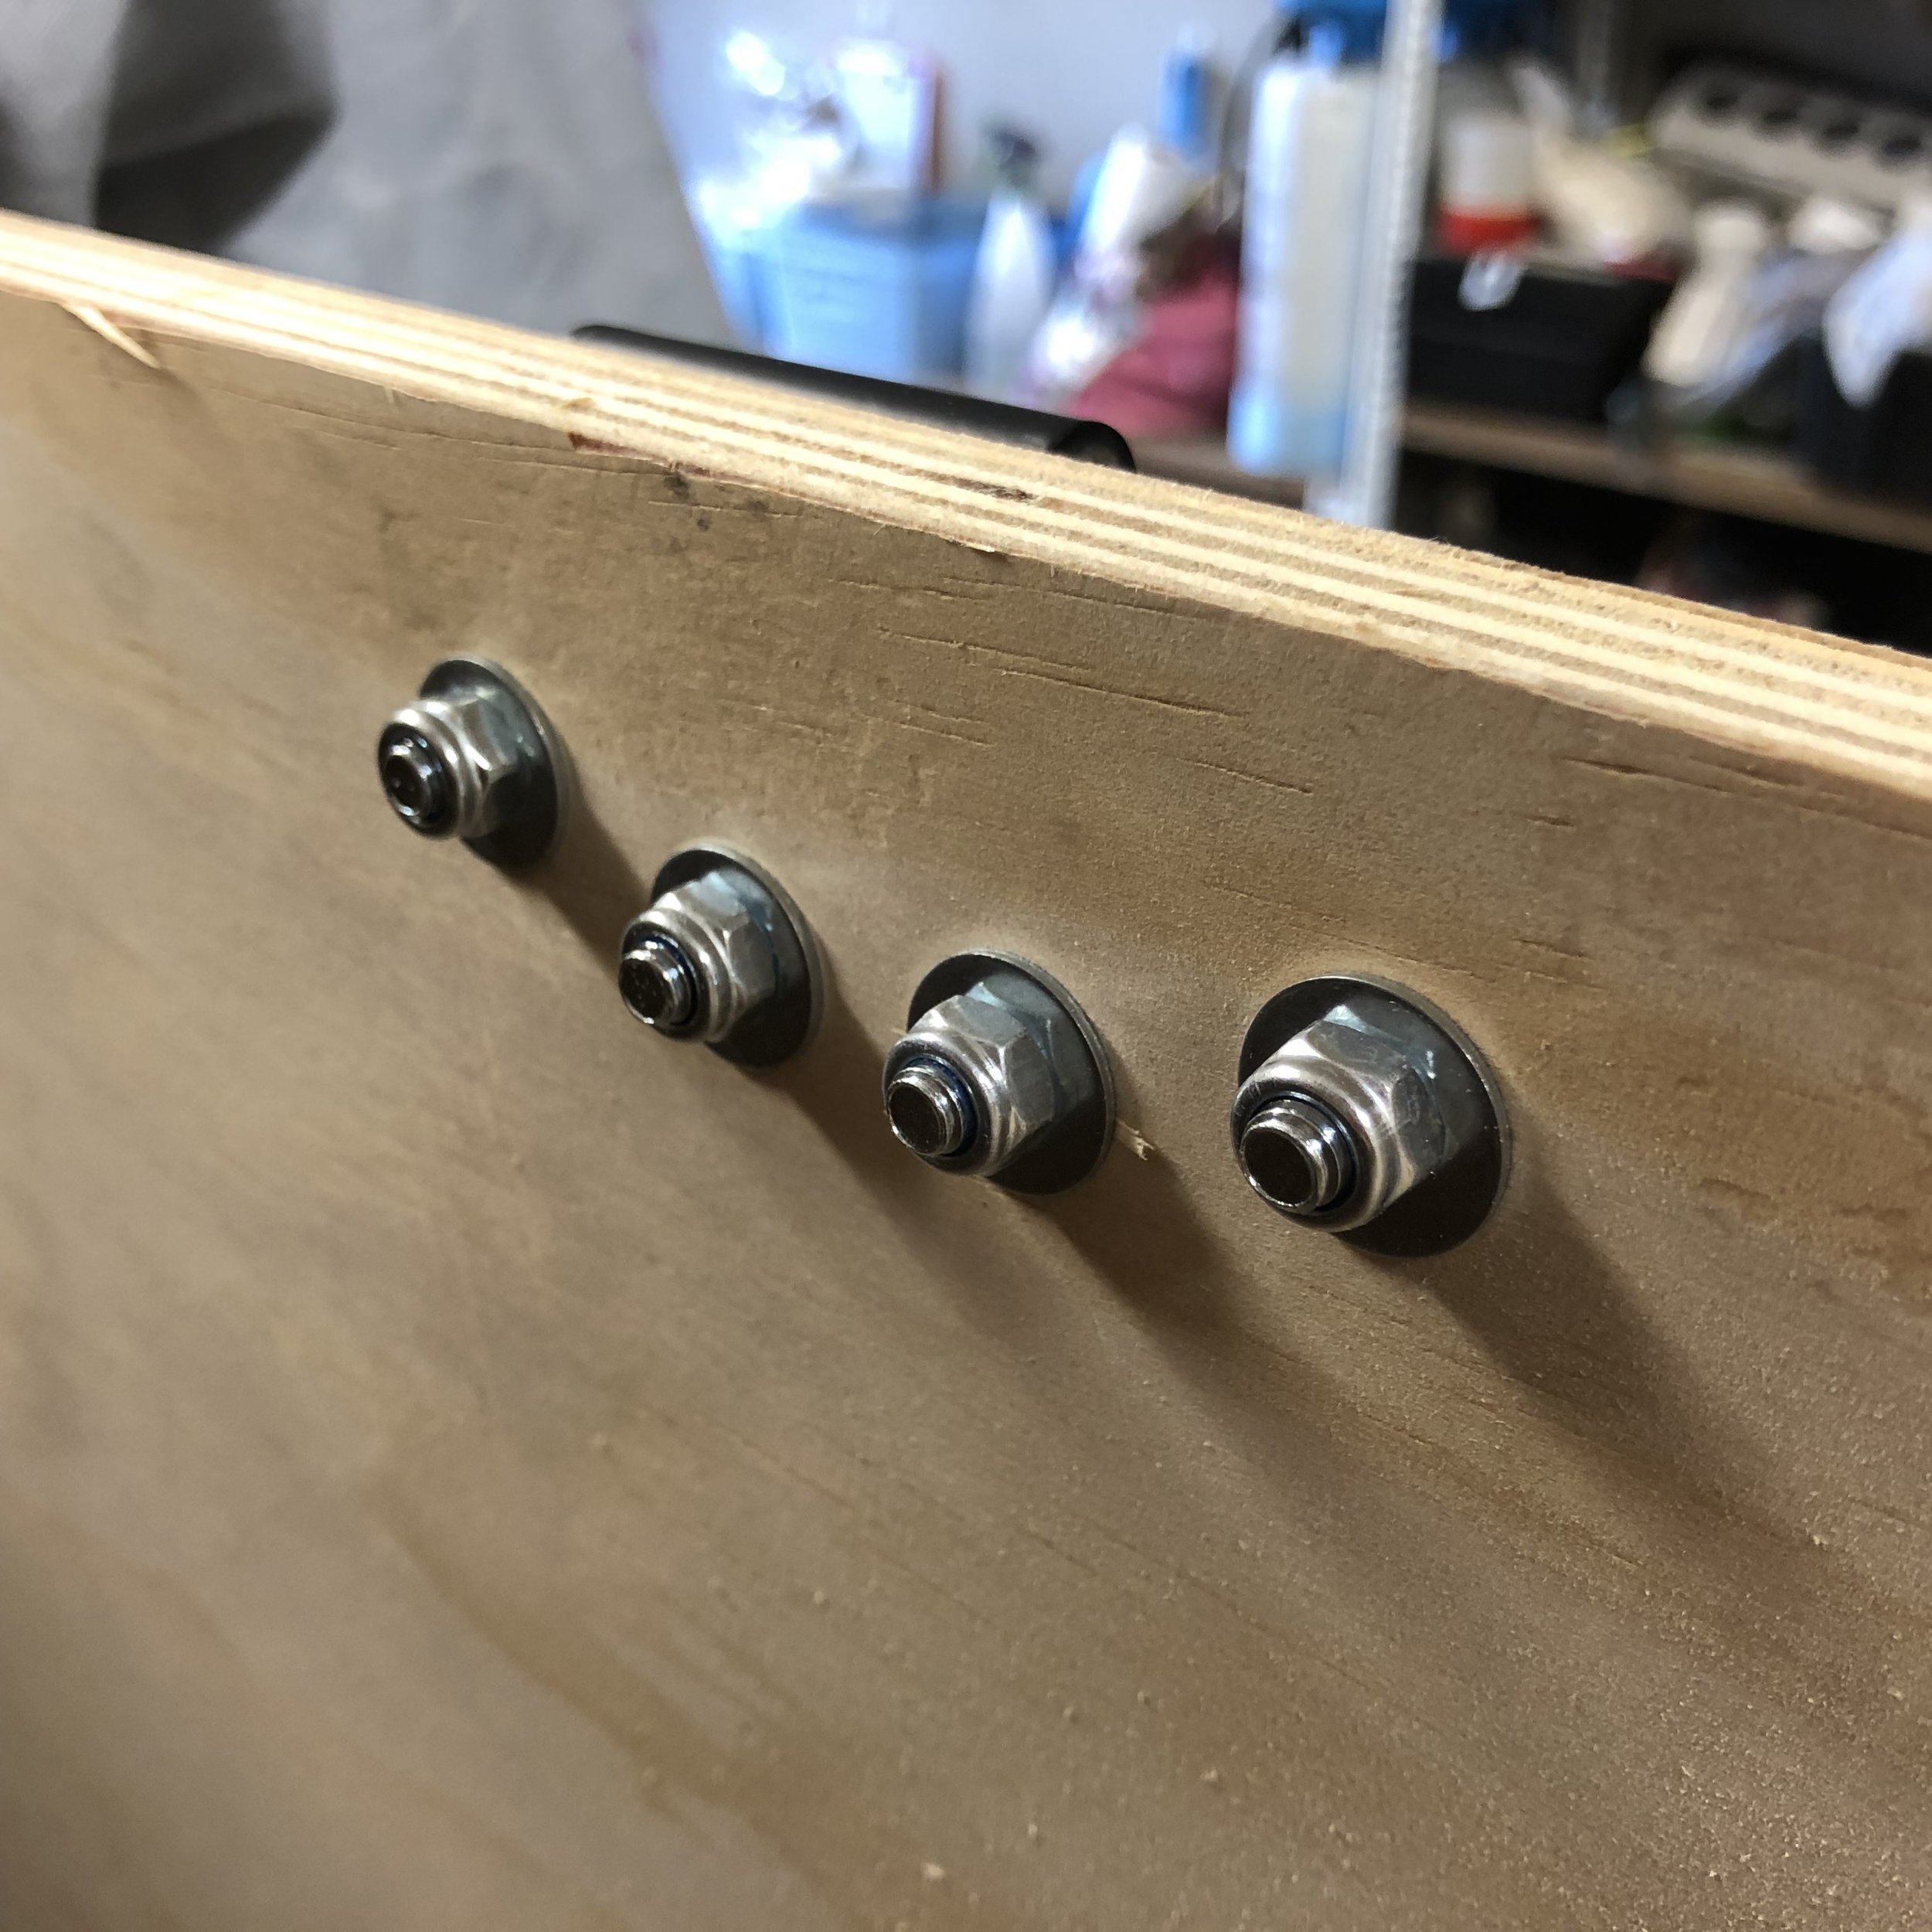 Use washers between the ply and the nut